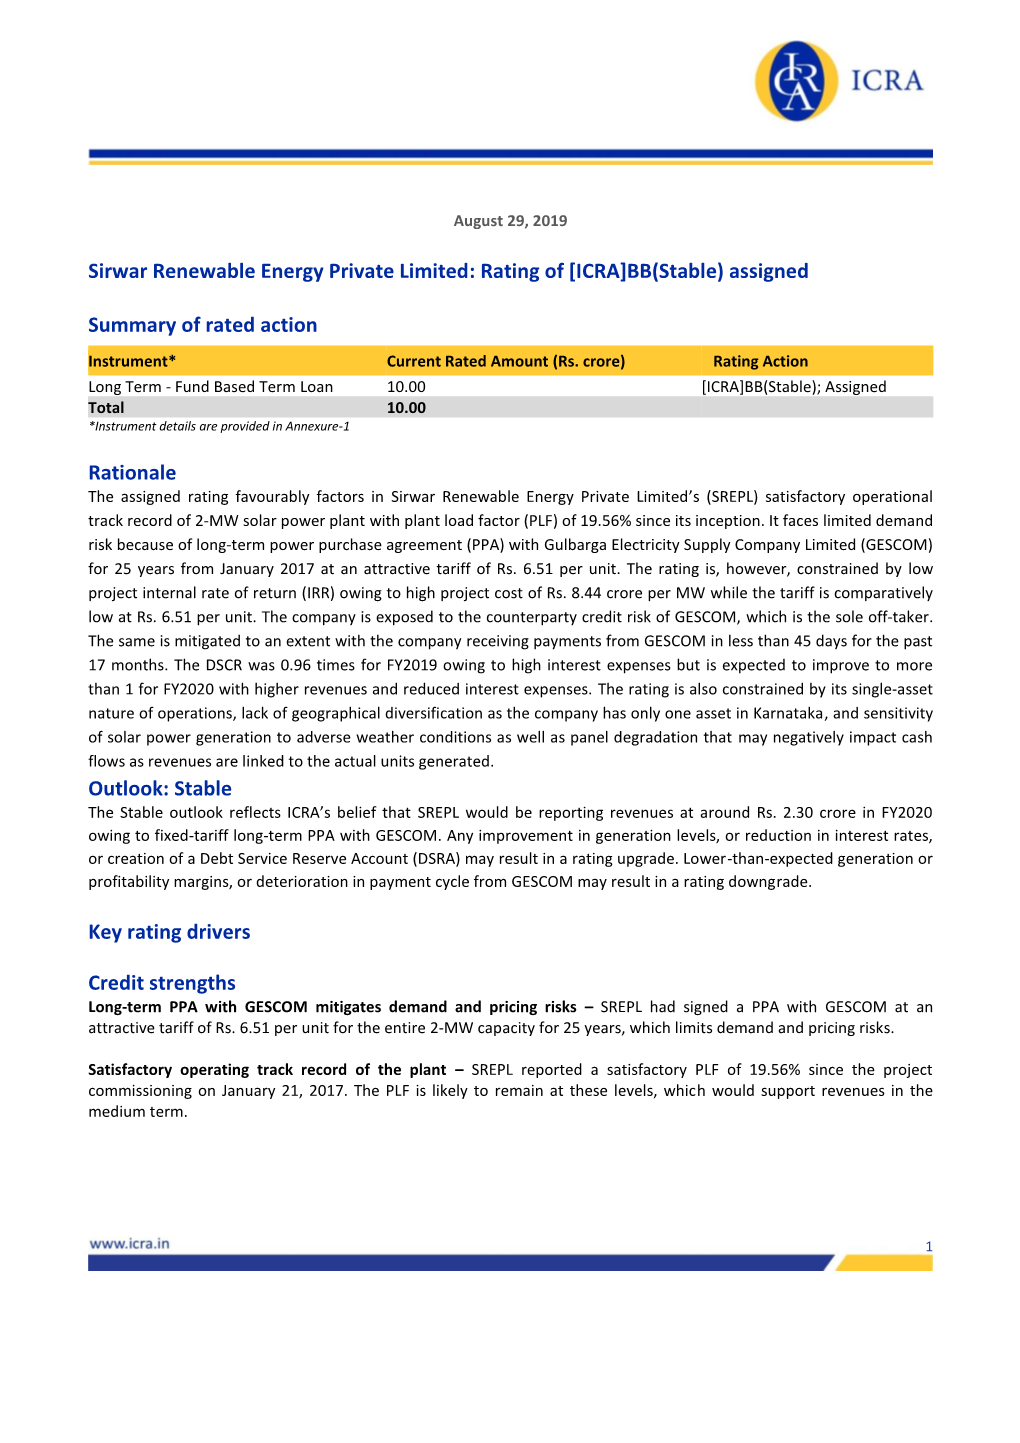 Sirwar Renewable Energy Private Limited: Rating of [ICRA]BB(Stable) Assigned